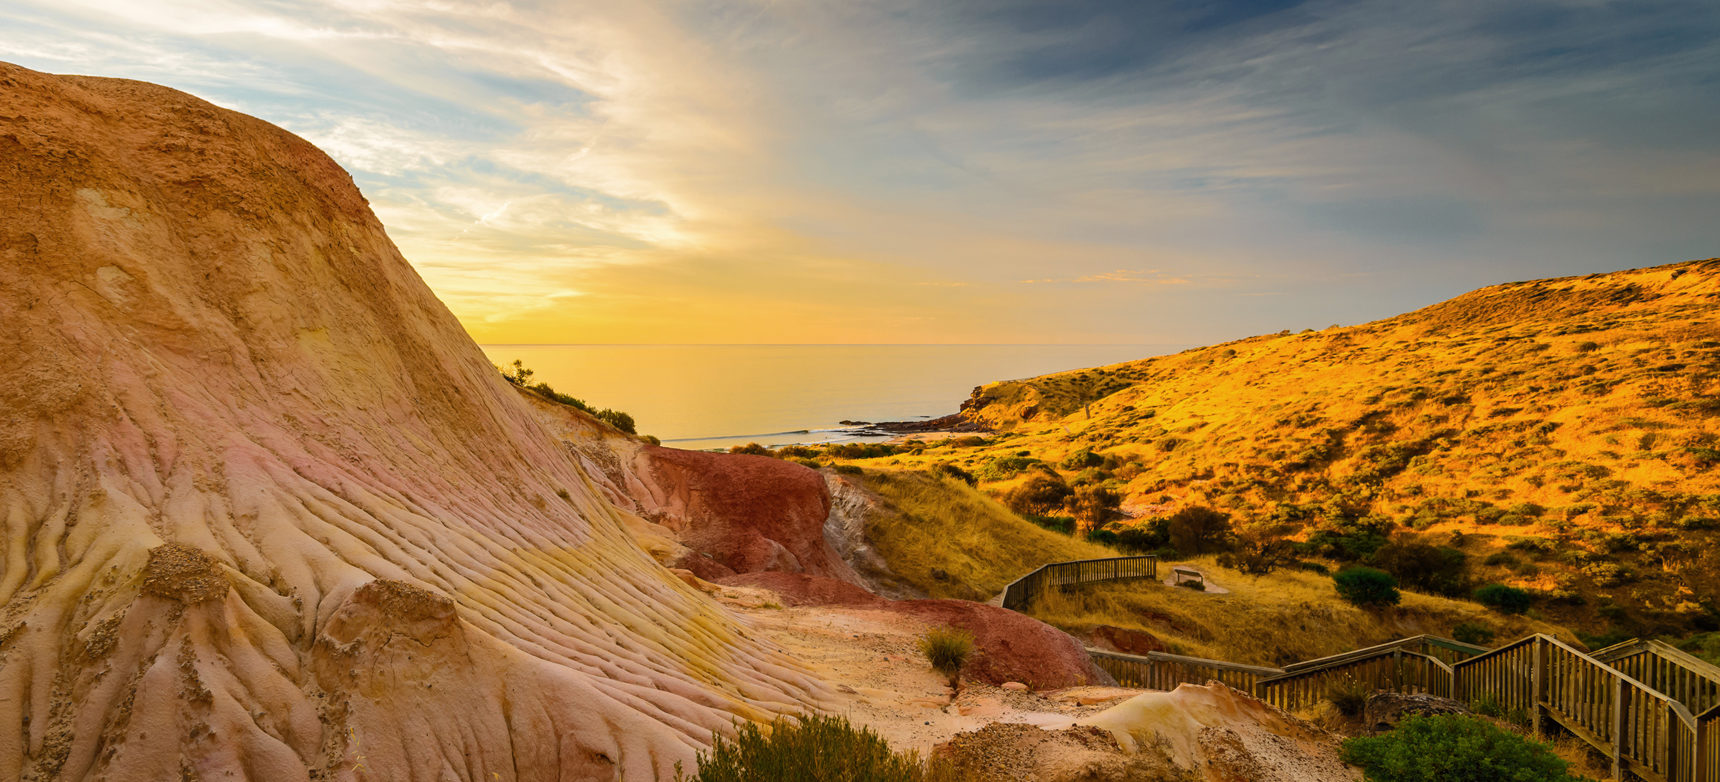 A view of the Hallett Cove Boardwalk with the ocean in the background.